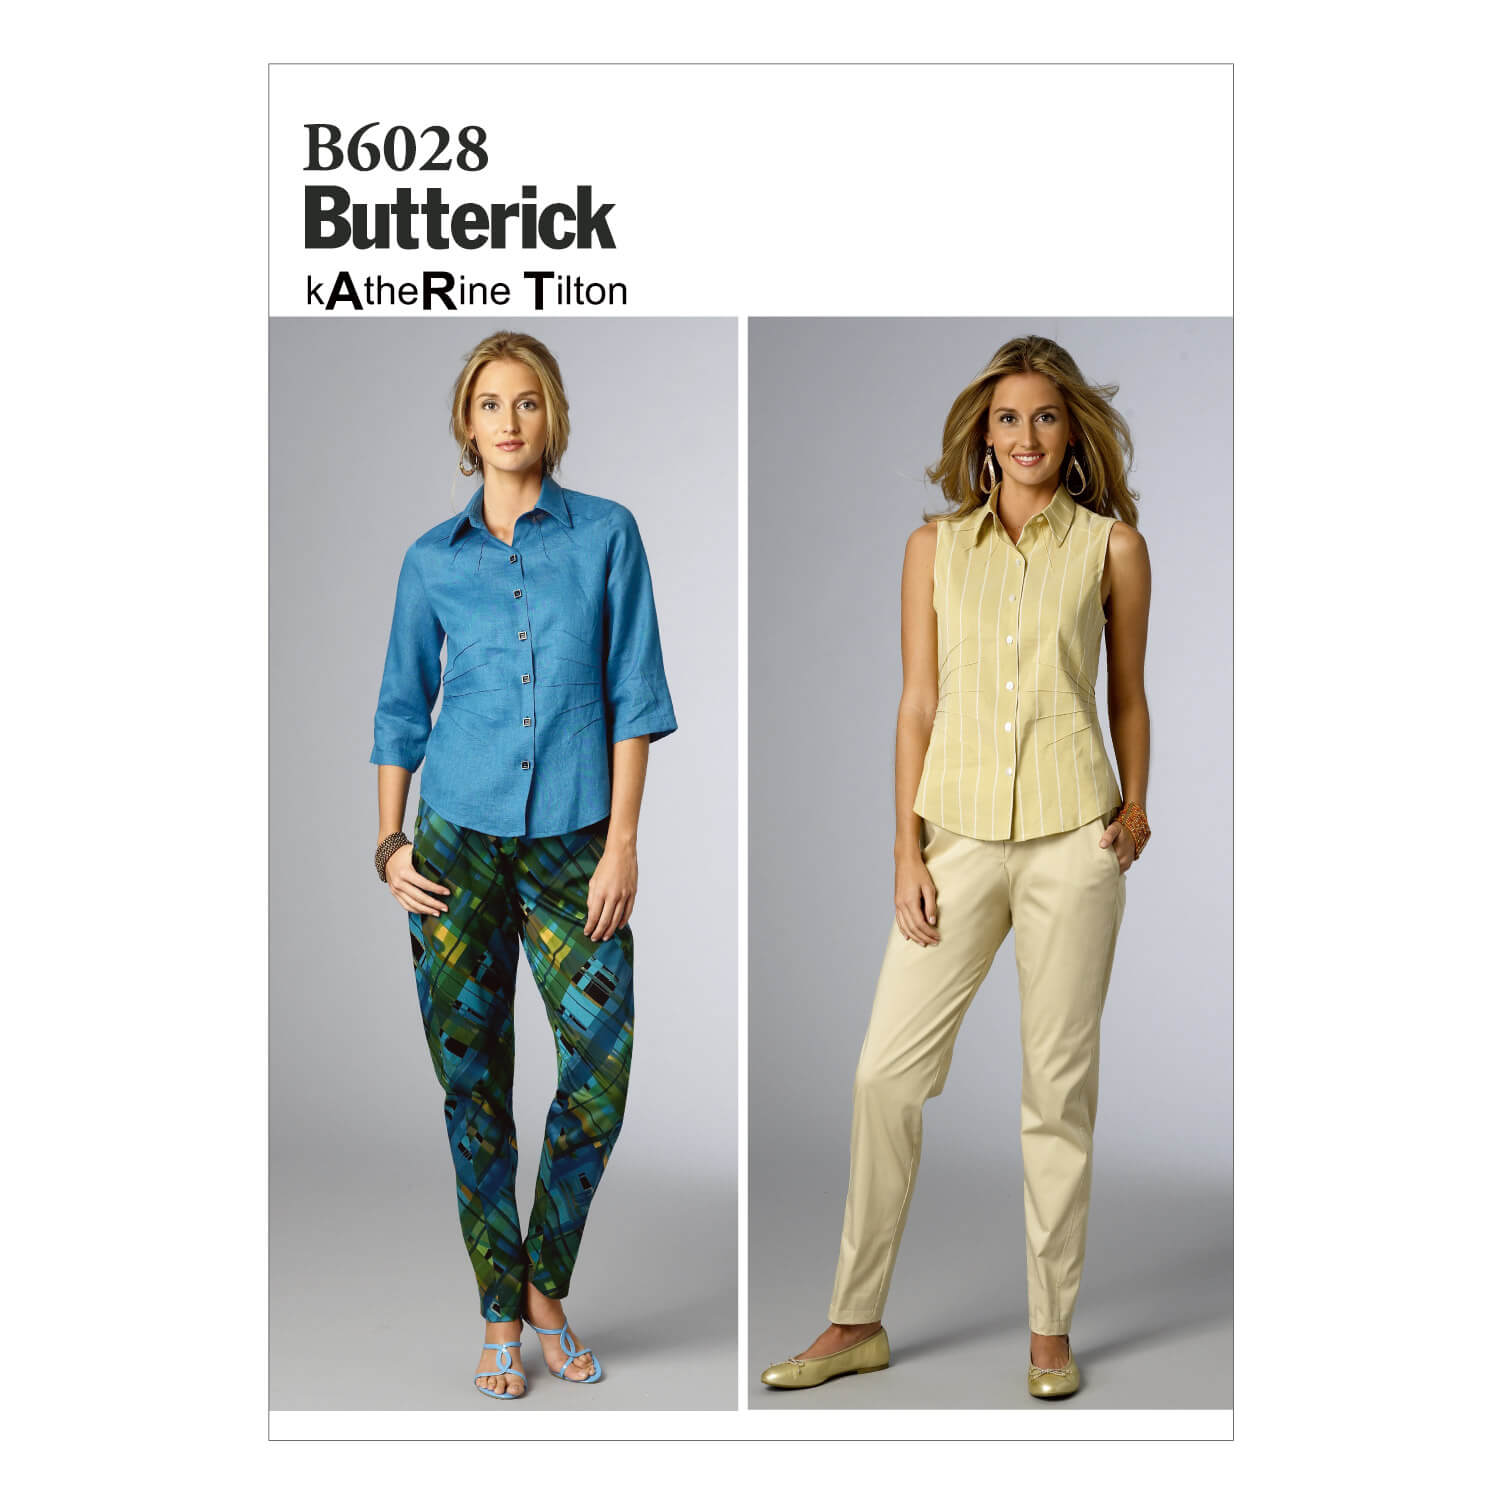 Butterick Sewing Pattern B6028 Misses' Pants